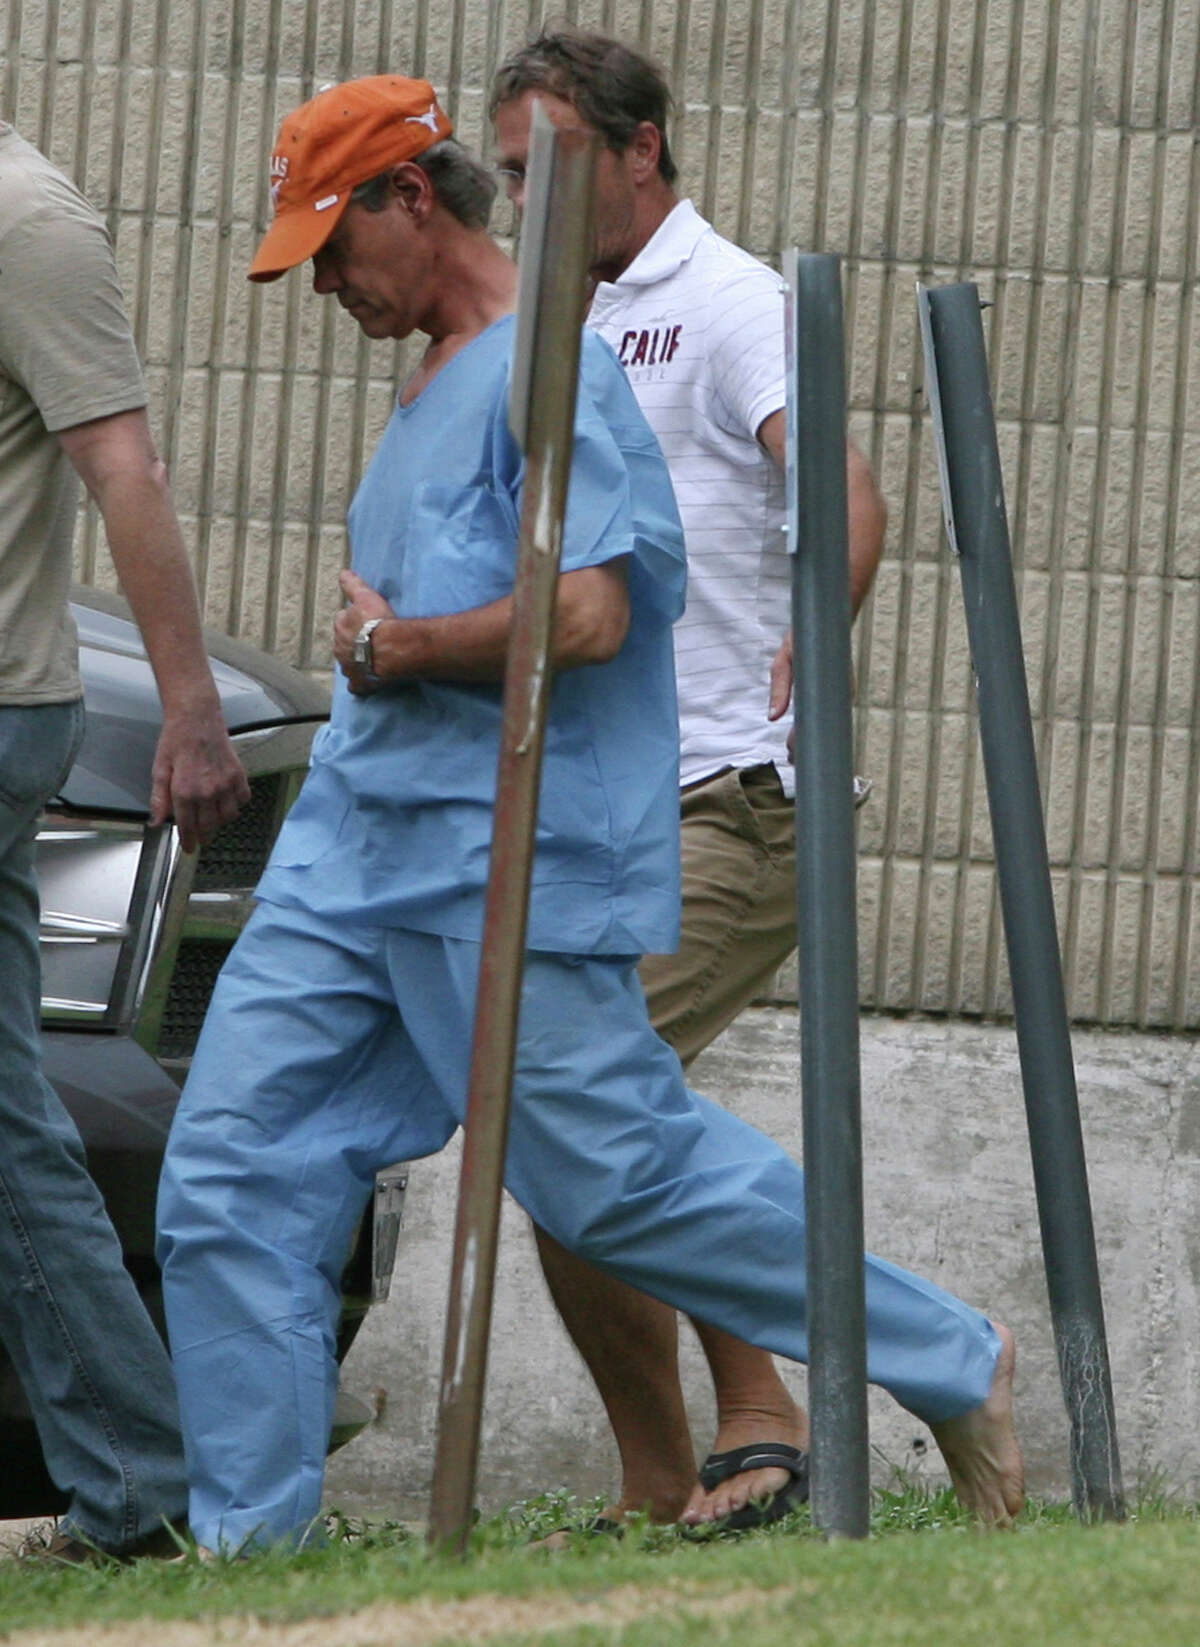 Randy Travis, center, wearing cap, exits the Grayson County jail with two unknown persons Wednesday Aug. 8, 2012, in Sherman, Texas, after being arraigned on charges of driving while intoxicated and retaliation. (AP Photo/The Herald Democrat, Chris Jennings) TV OUT; MAGS OUT; TV AND MAGAZINE CALL FOR RATES TERMS;MANDATORY CREDIT